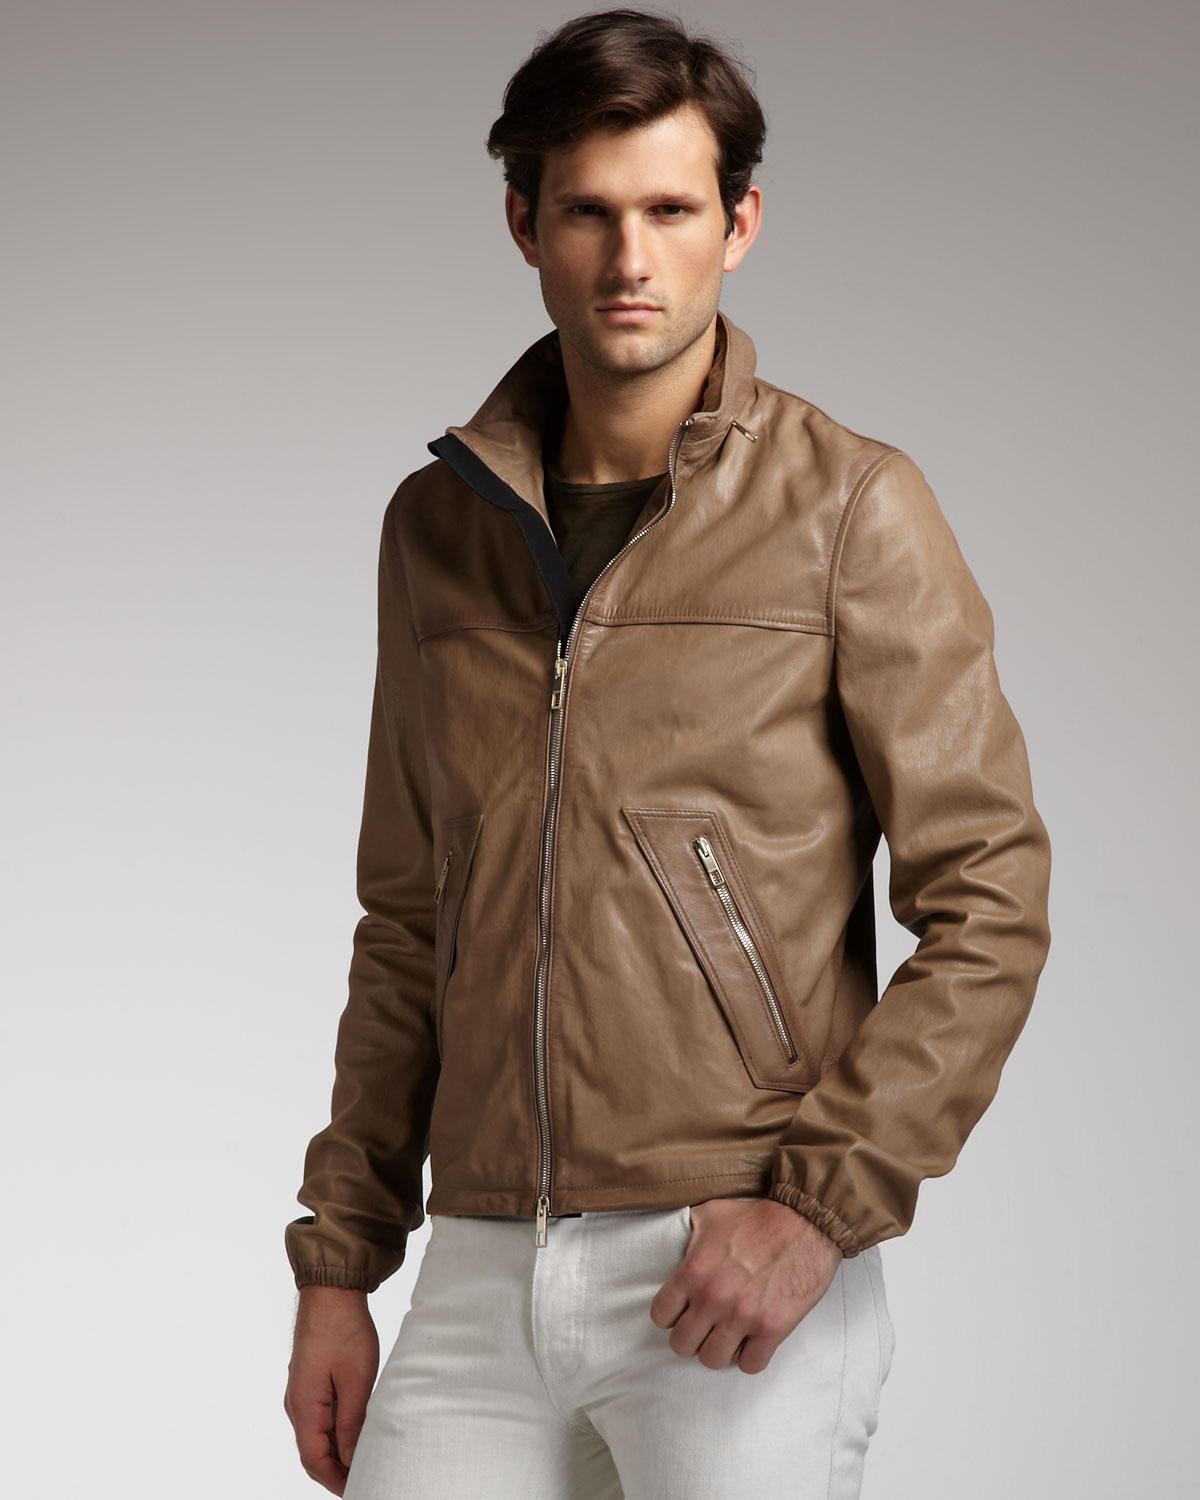 Lyst - Valentino Leather Jacket in Natural for Men